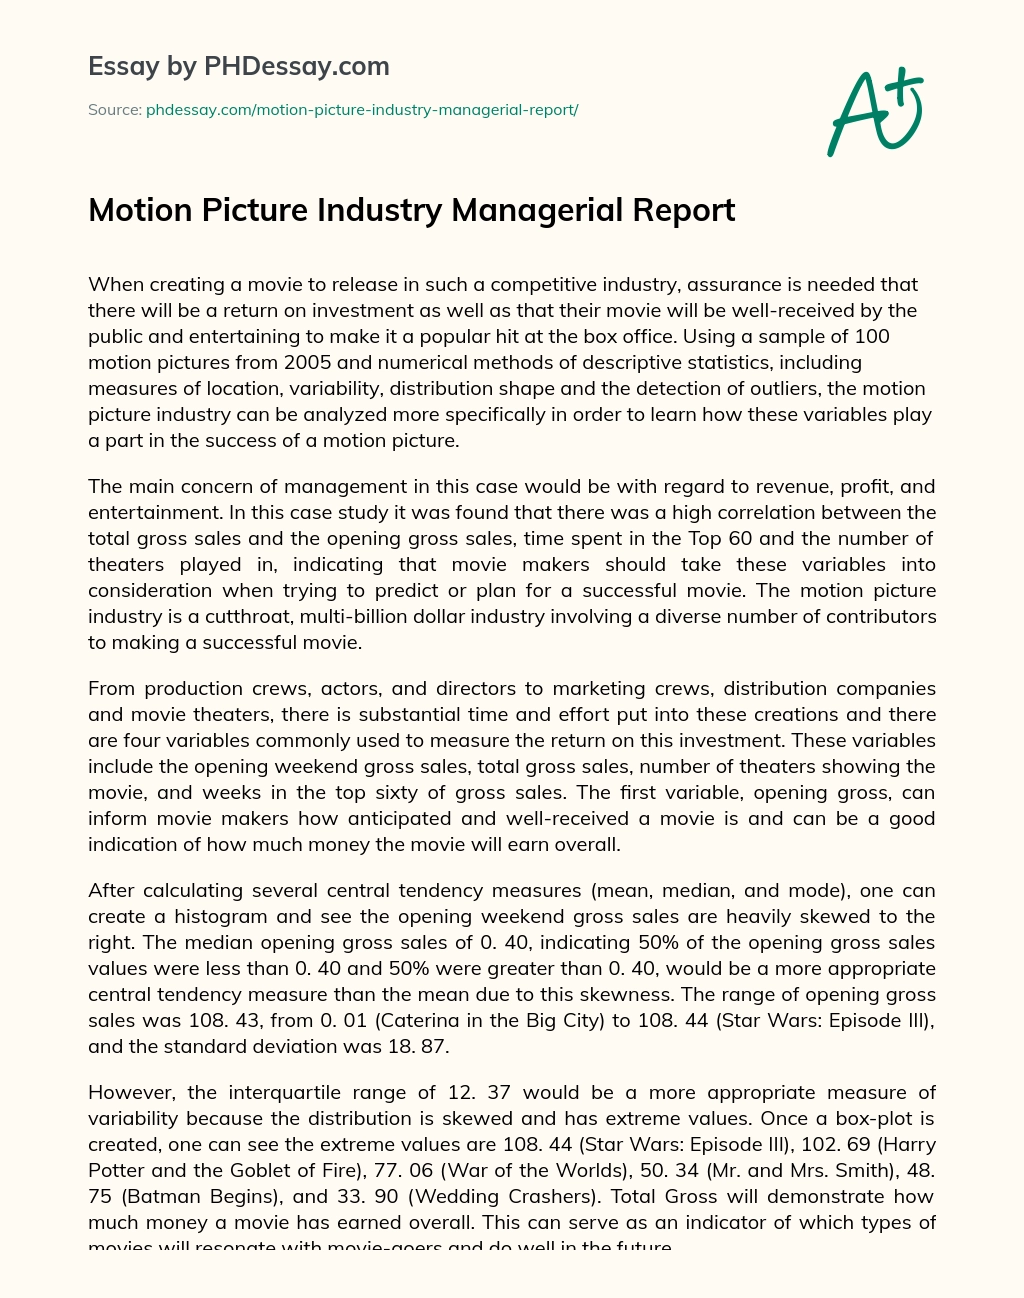 Motion Picture Industry Managerial Report essay